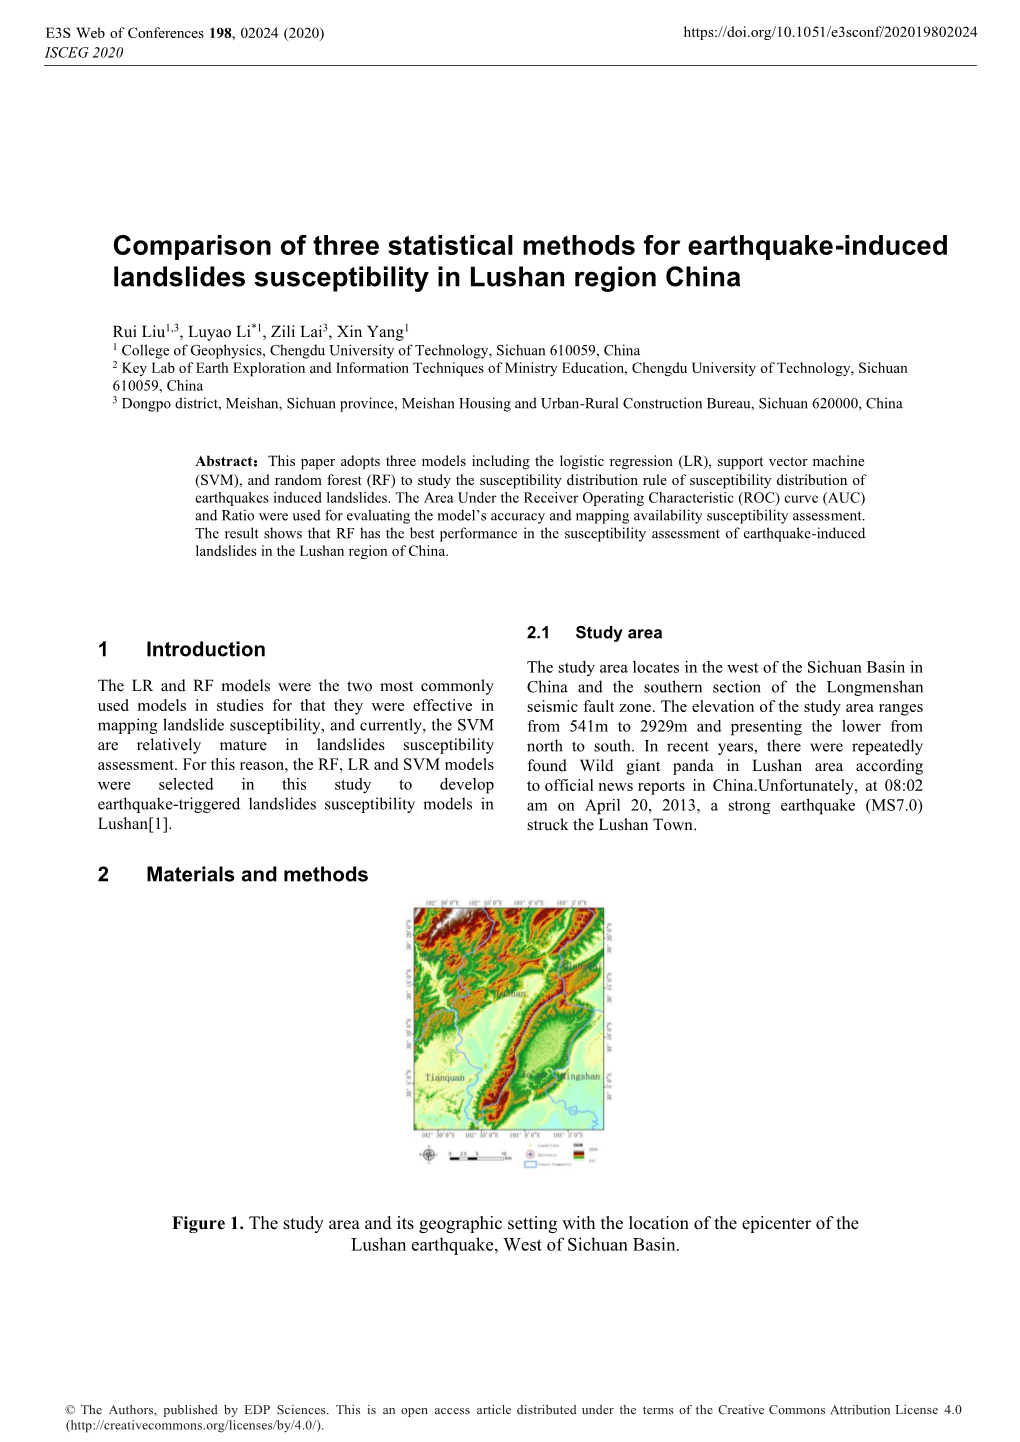 Comparison of Three Statistical Methods for Earthquake-Induced Landslides Susceptibility in Lushan Region China